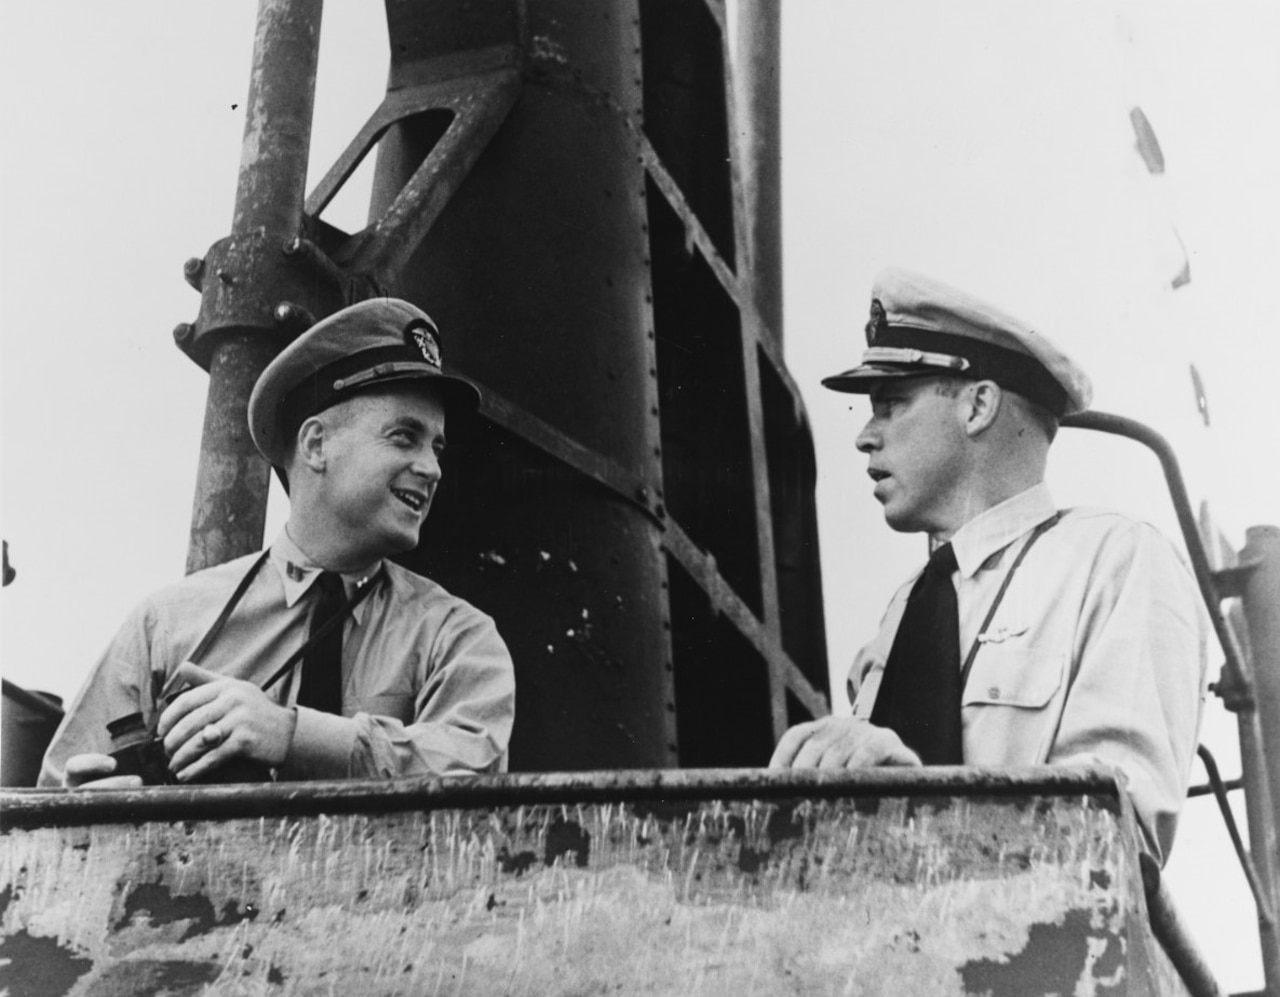 Two men in sailor caps stand with their arms resting on a metal ledge.